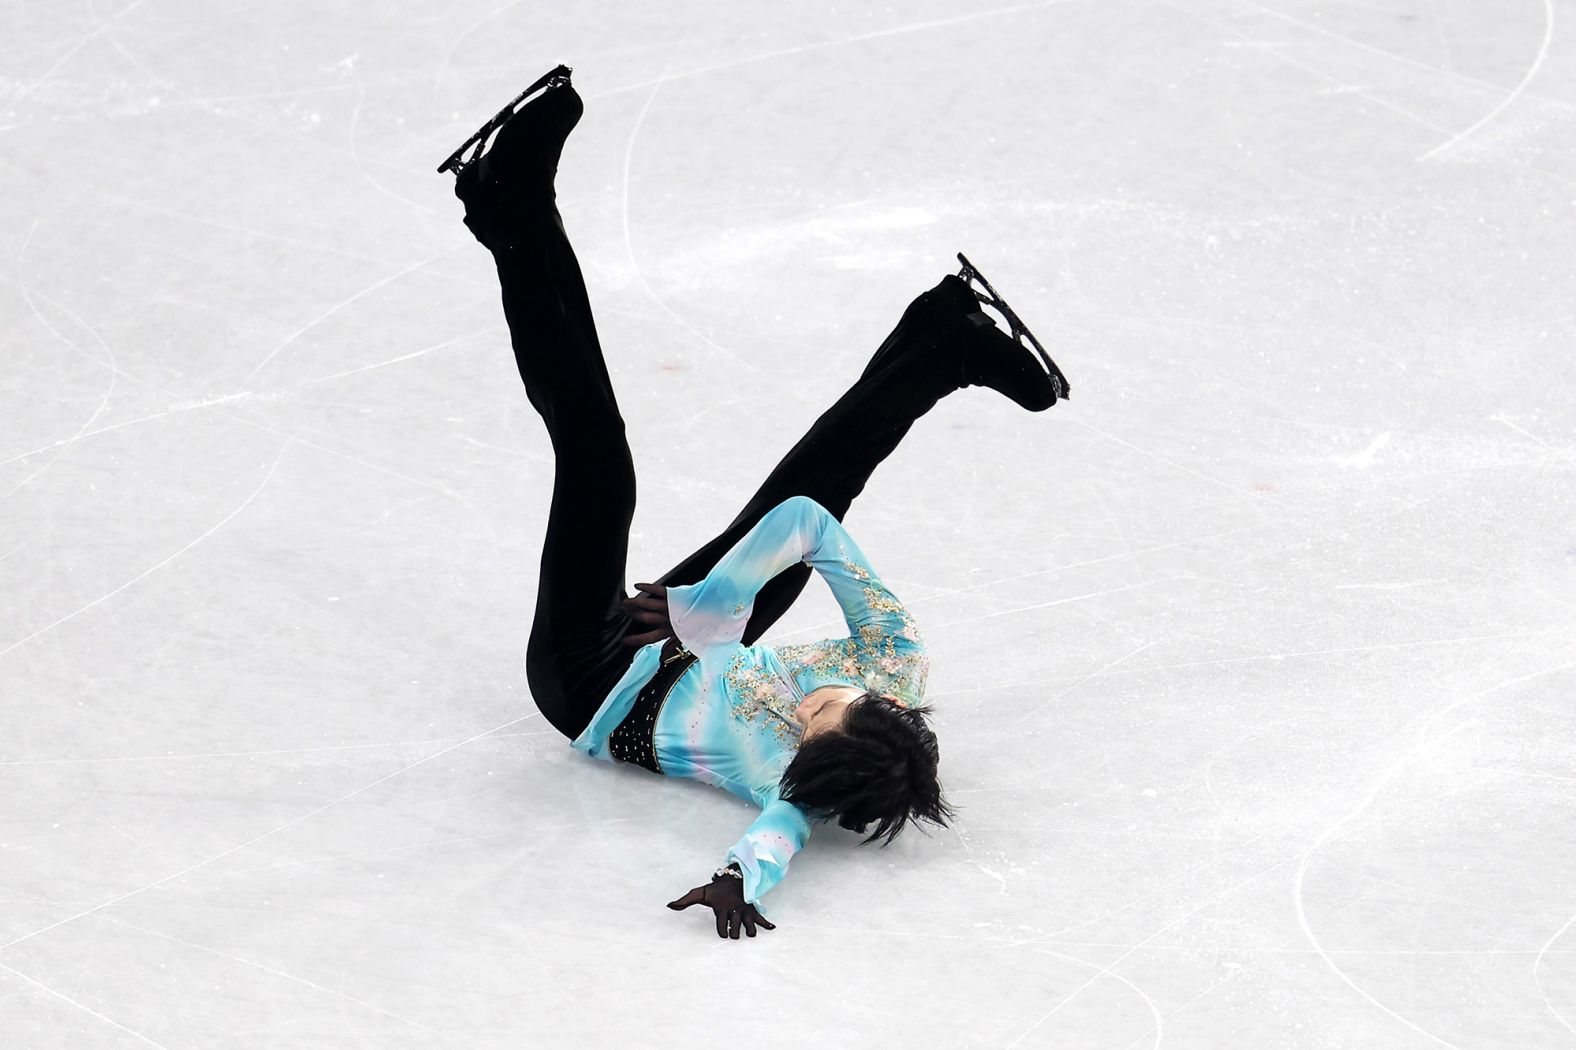 Japan's Yuzuru Hanyu, the Olympic champion in 2014 and 2018, <a href="index.php?page=&url=https%3A%2F%2Fwww.cnn.com%2Fworld%2Flive-news%2Fbeijing-winter-olympics-02-10-22-spt%2Fh_d8db79c002b127feb6cb369f4d76be8b" target="_blank">falls during his free skate</a> on February 10. He attempted a quadruple axel, a highly difficult move that has never been completed in competition. He finished in fourth place.